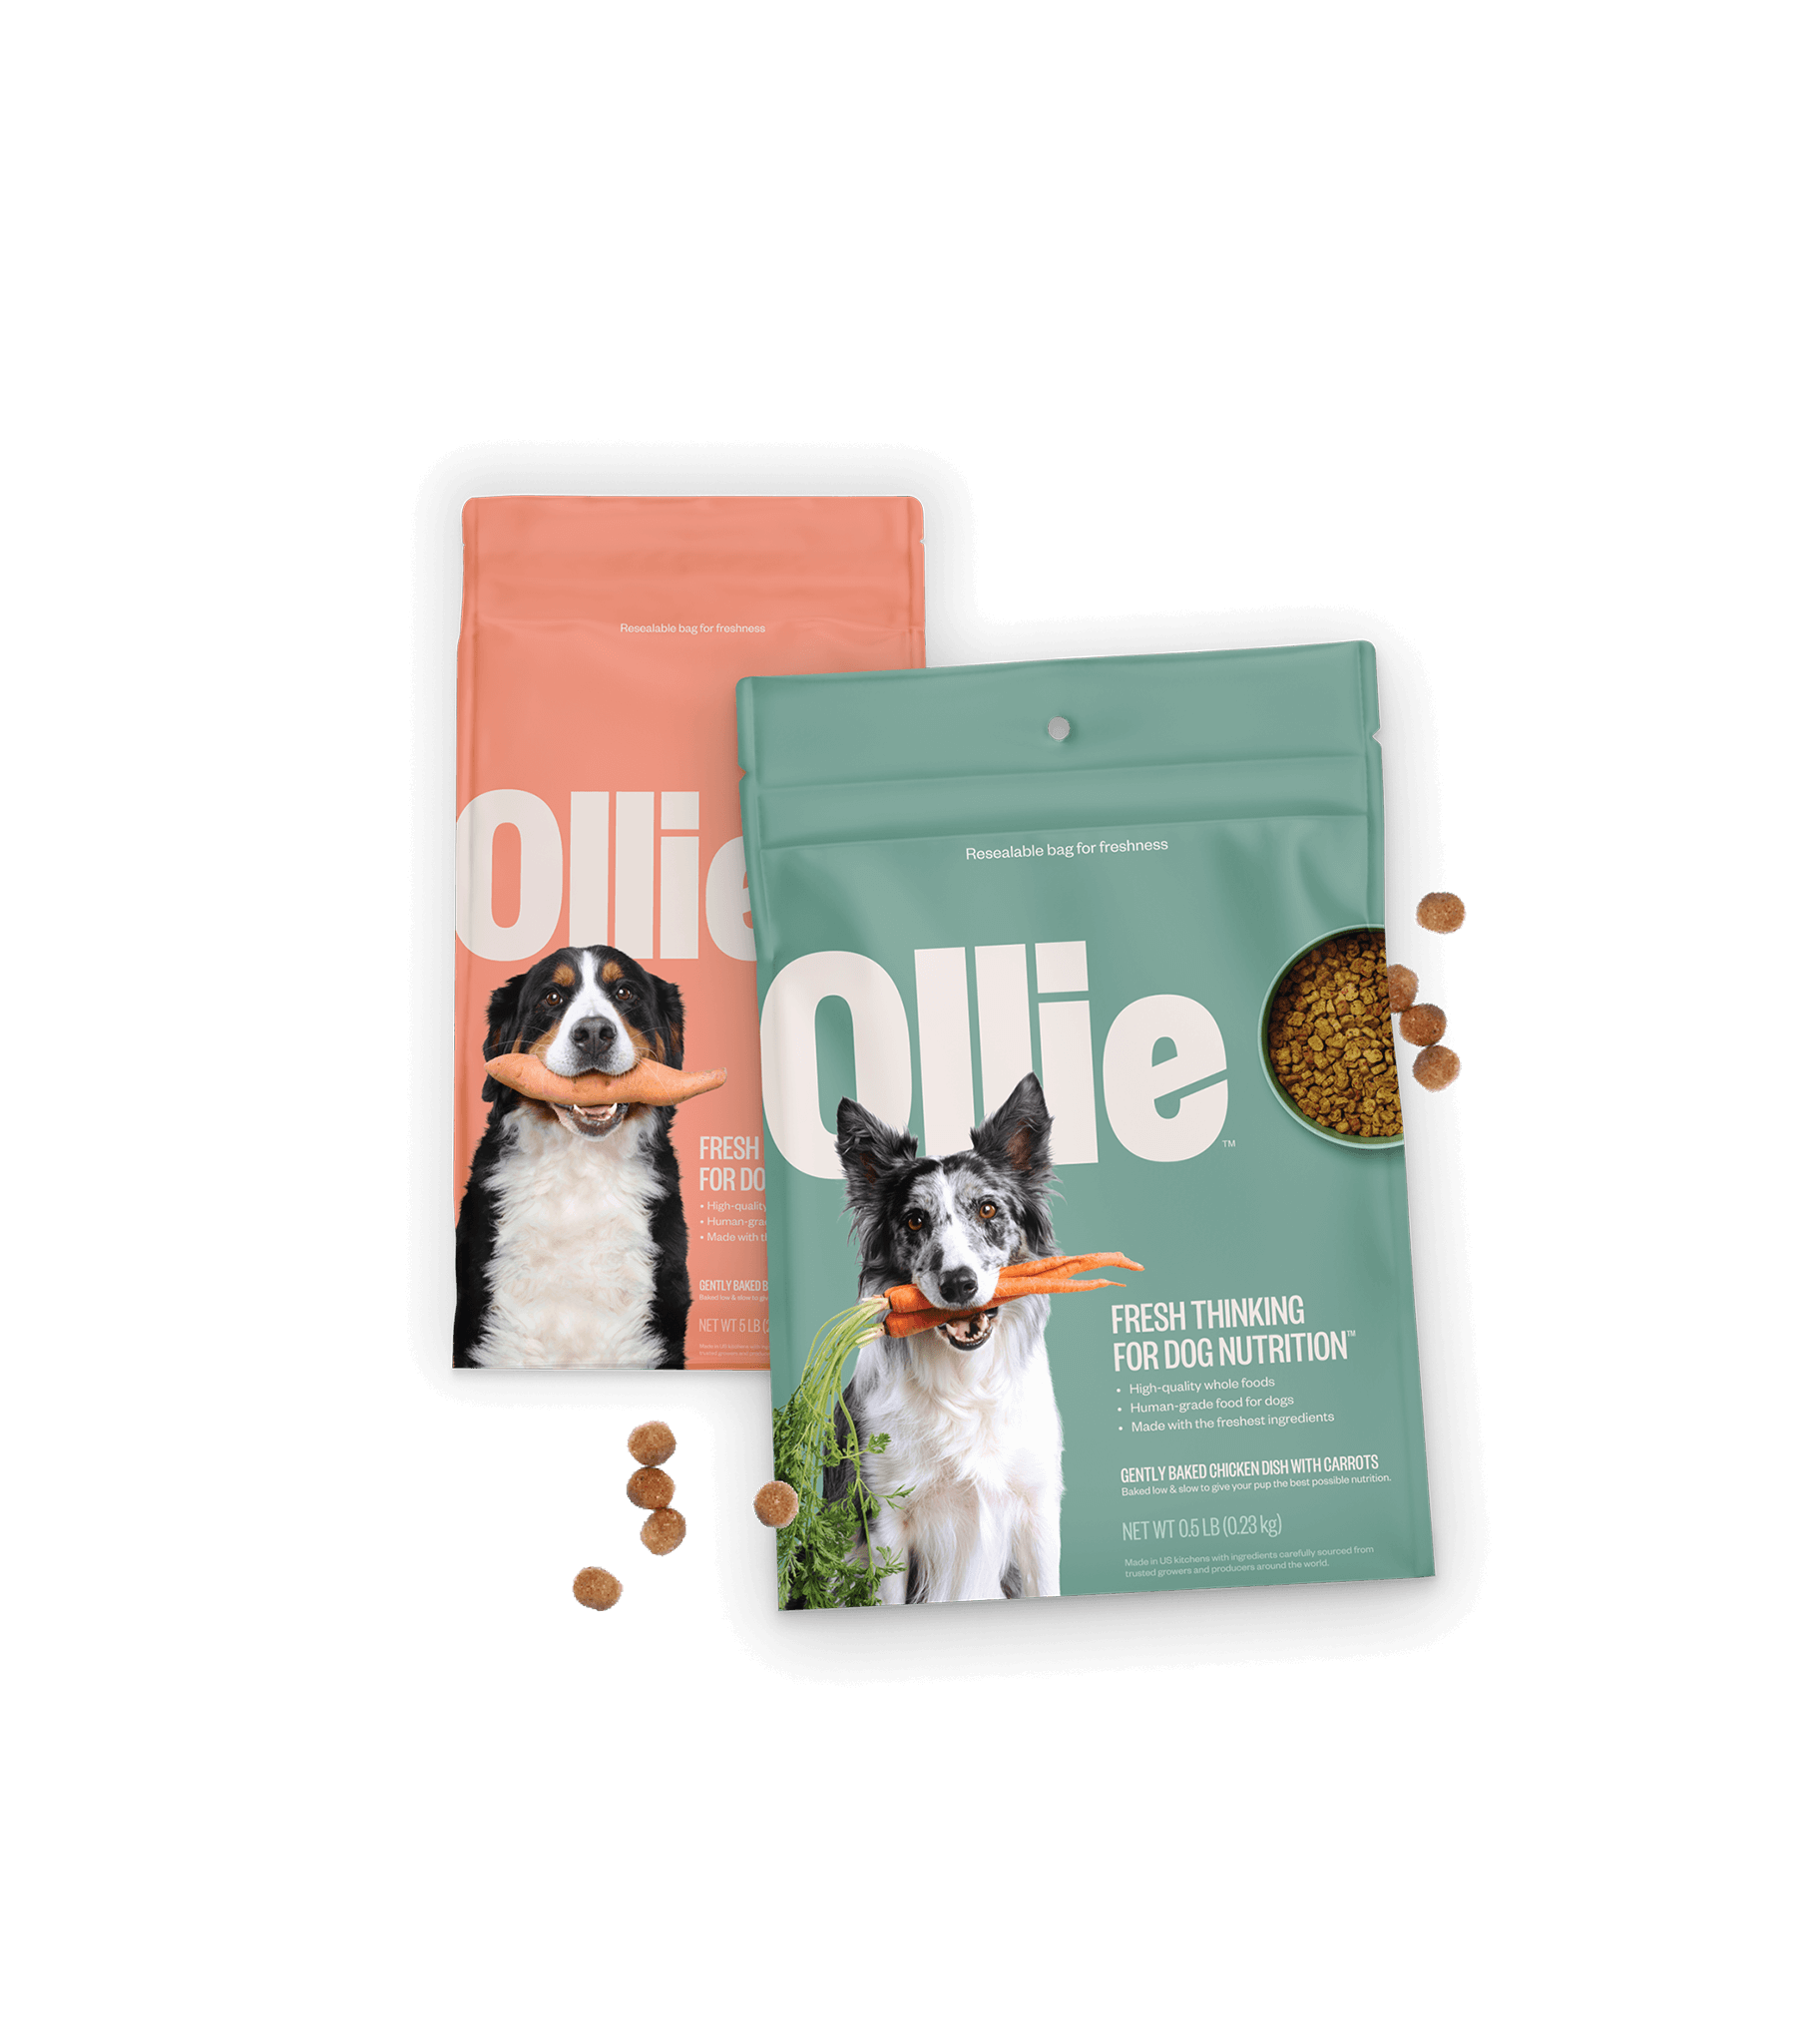 Packaging Design Agency For Pet Products